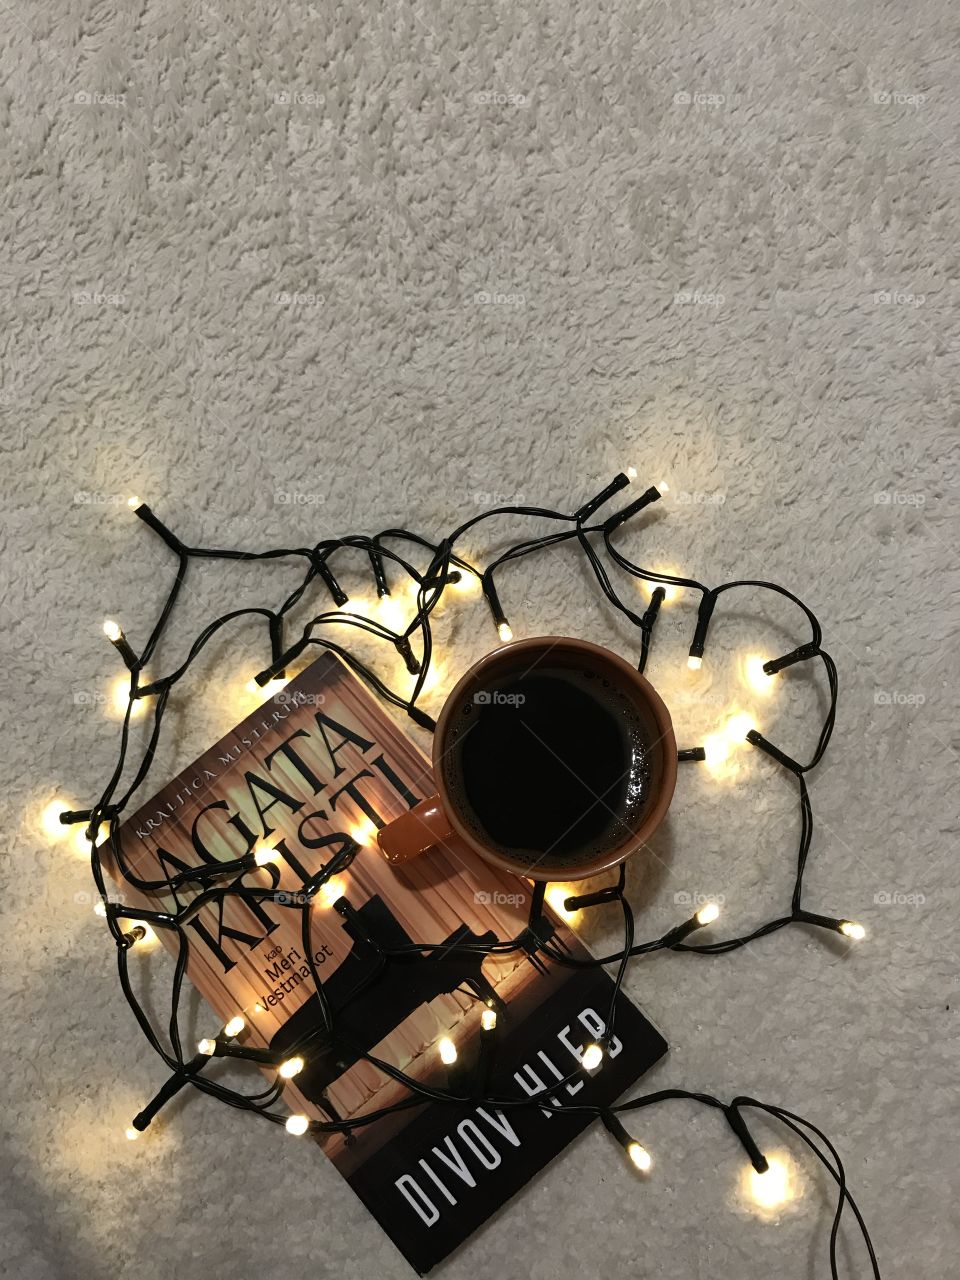 These are autumn vibes with a book and a warm cup of coffee on the cozy blanket.